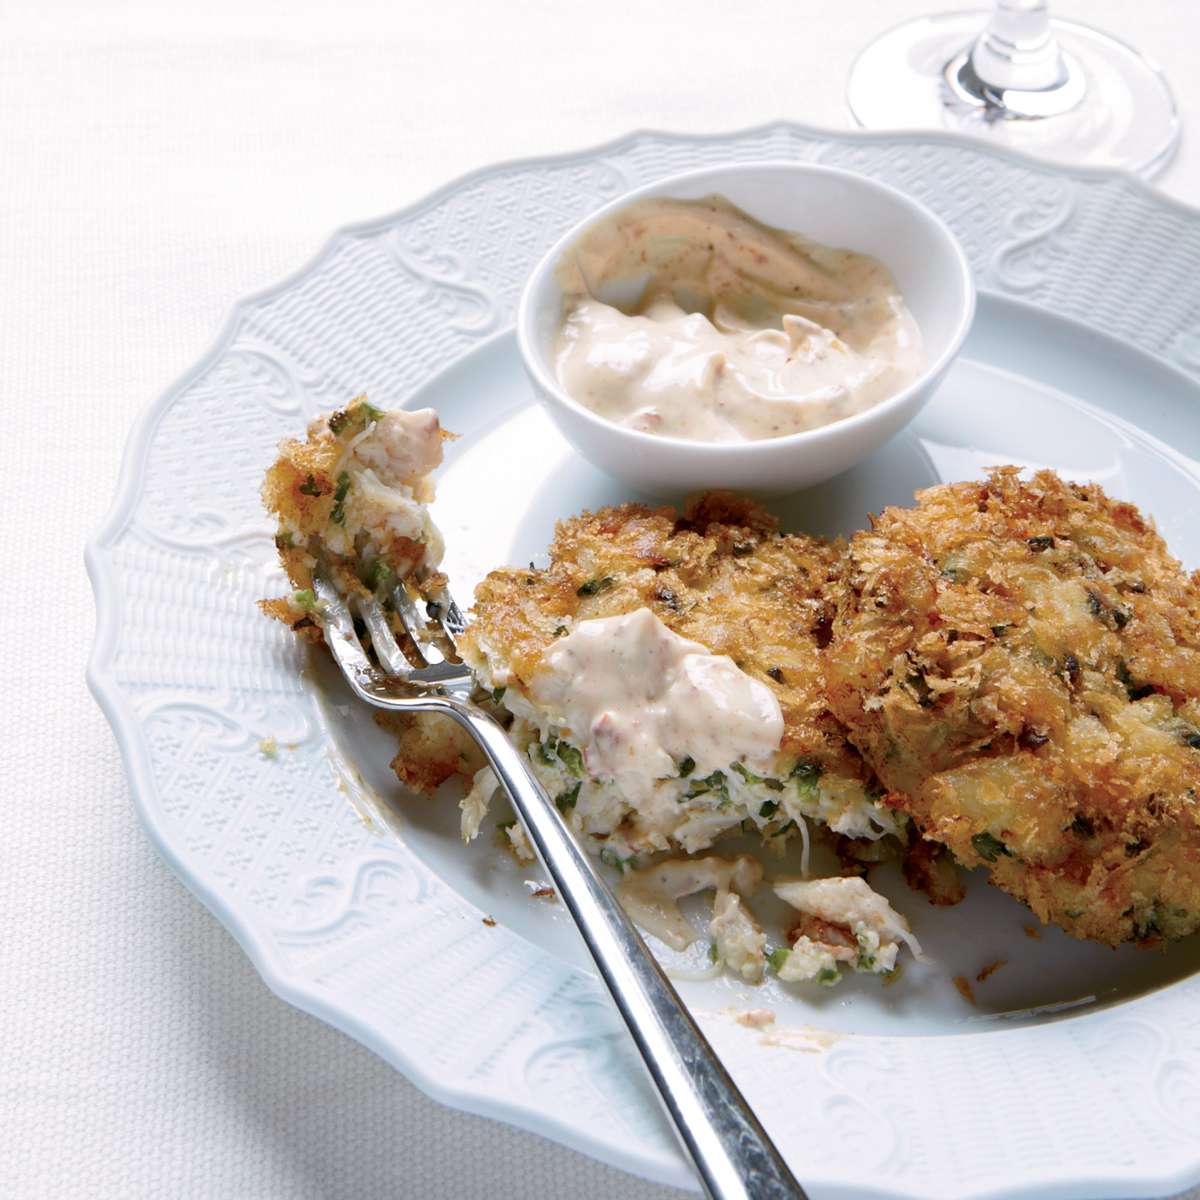 12 Ways to Make the Best-Ever Crab Cakes